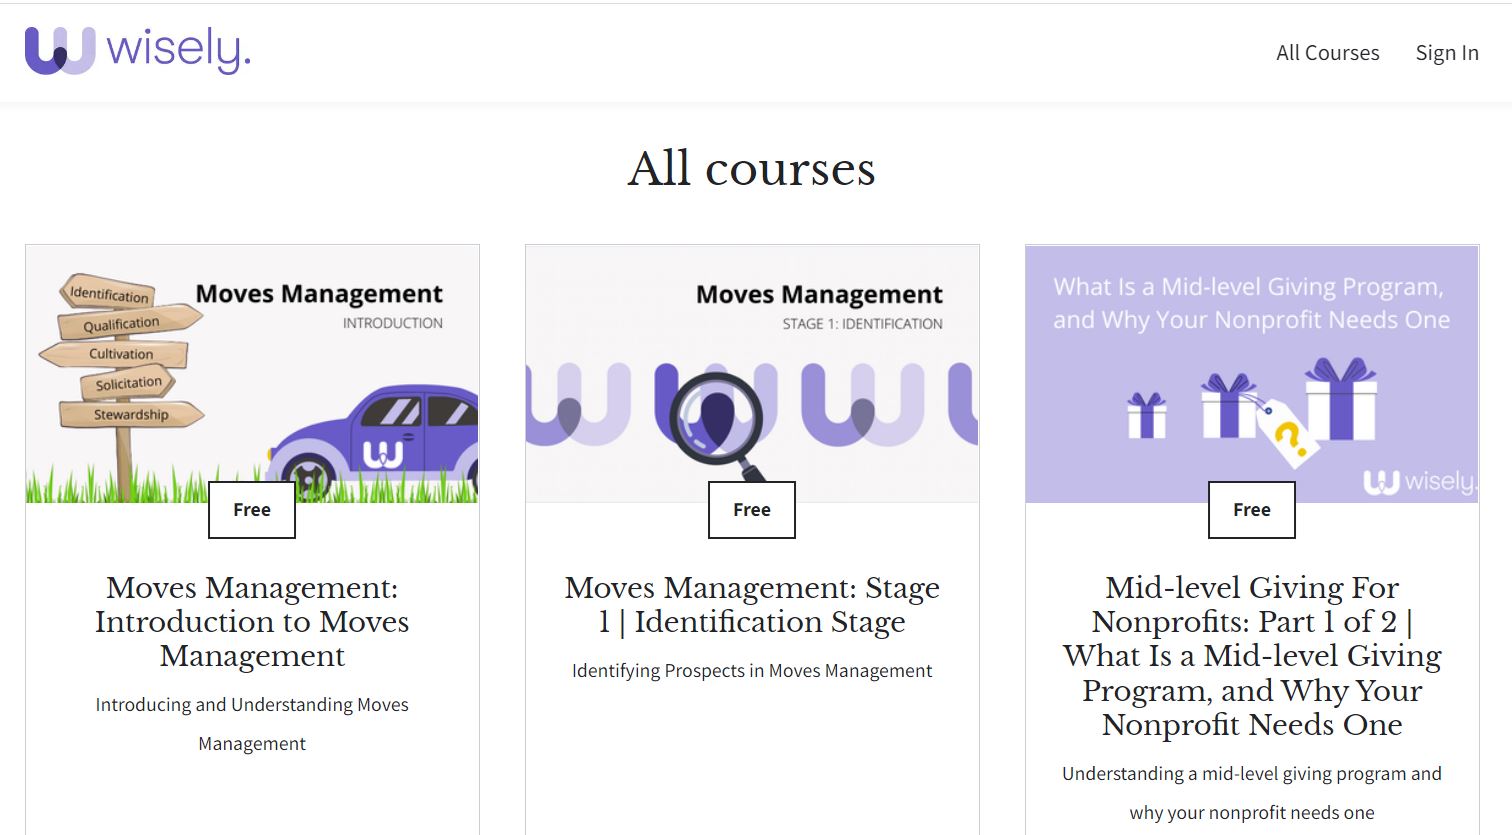 Courses Wisely has created using LEAi